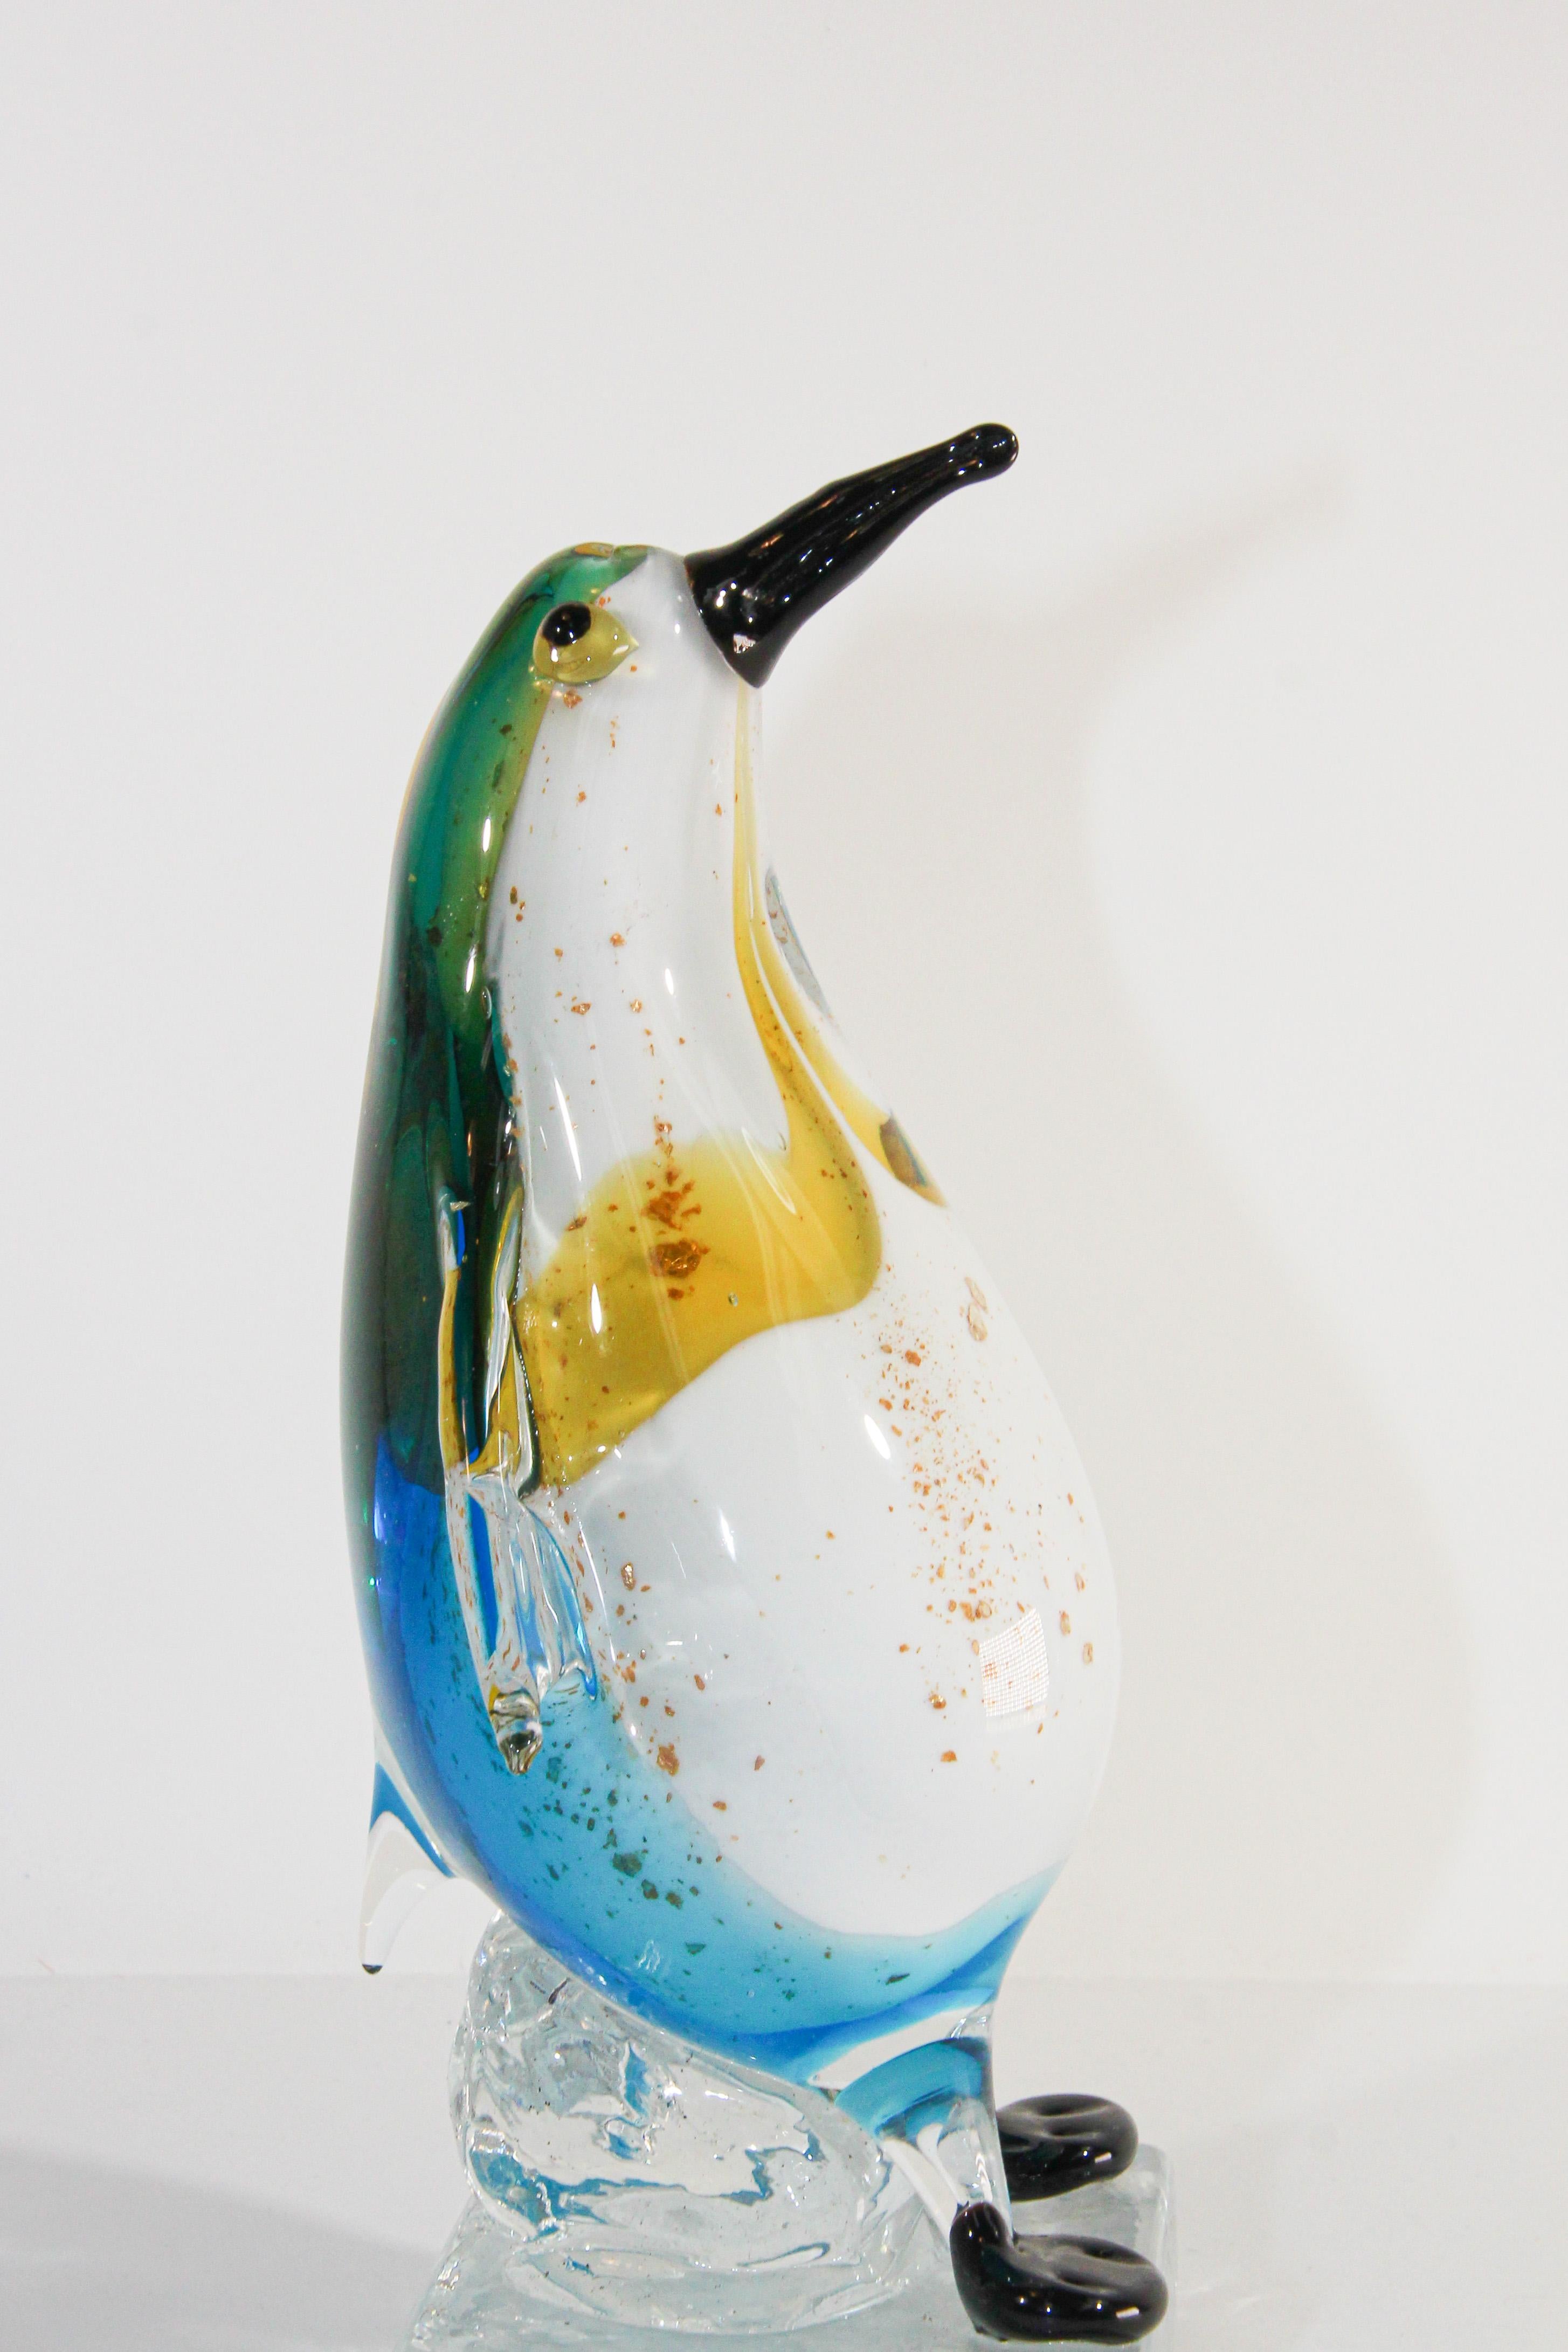 Vintage collectible Murano art glass hand blown sculpture of a penguin in blue and yellow colored glass figurine with gold murine.
Handcrafted beautiful Mid-Century Modern hand blown art glass Italian decorated in clear, blue, black and